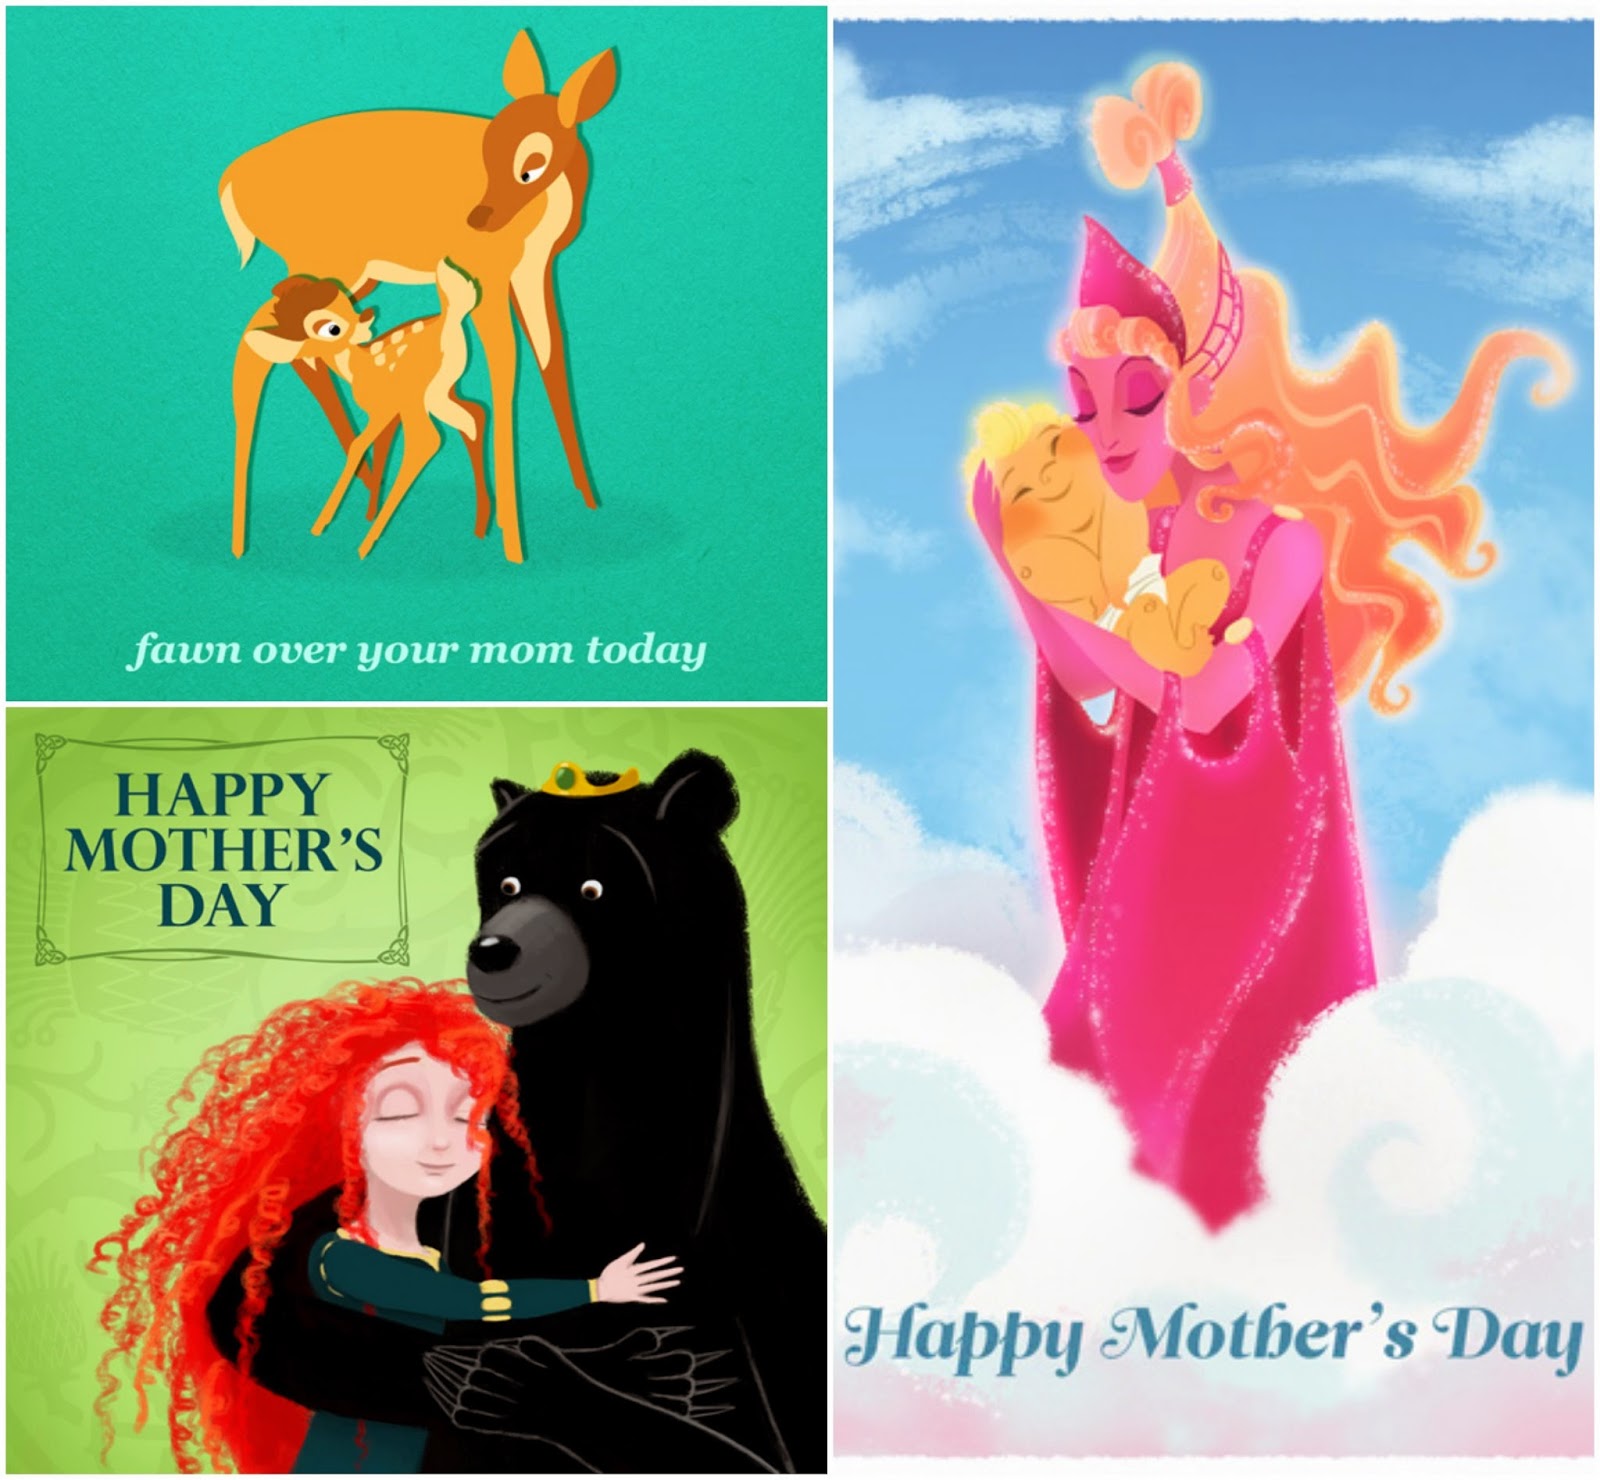 Disney Sisters In Honor of Mother's Day Disney Cards to Share with